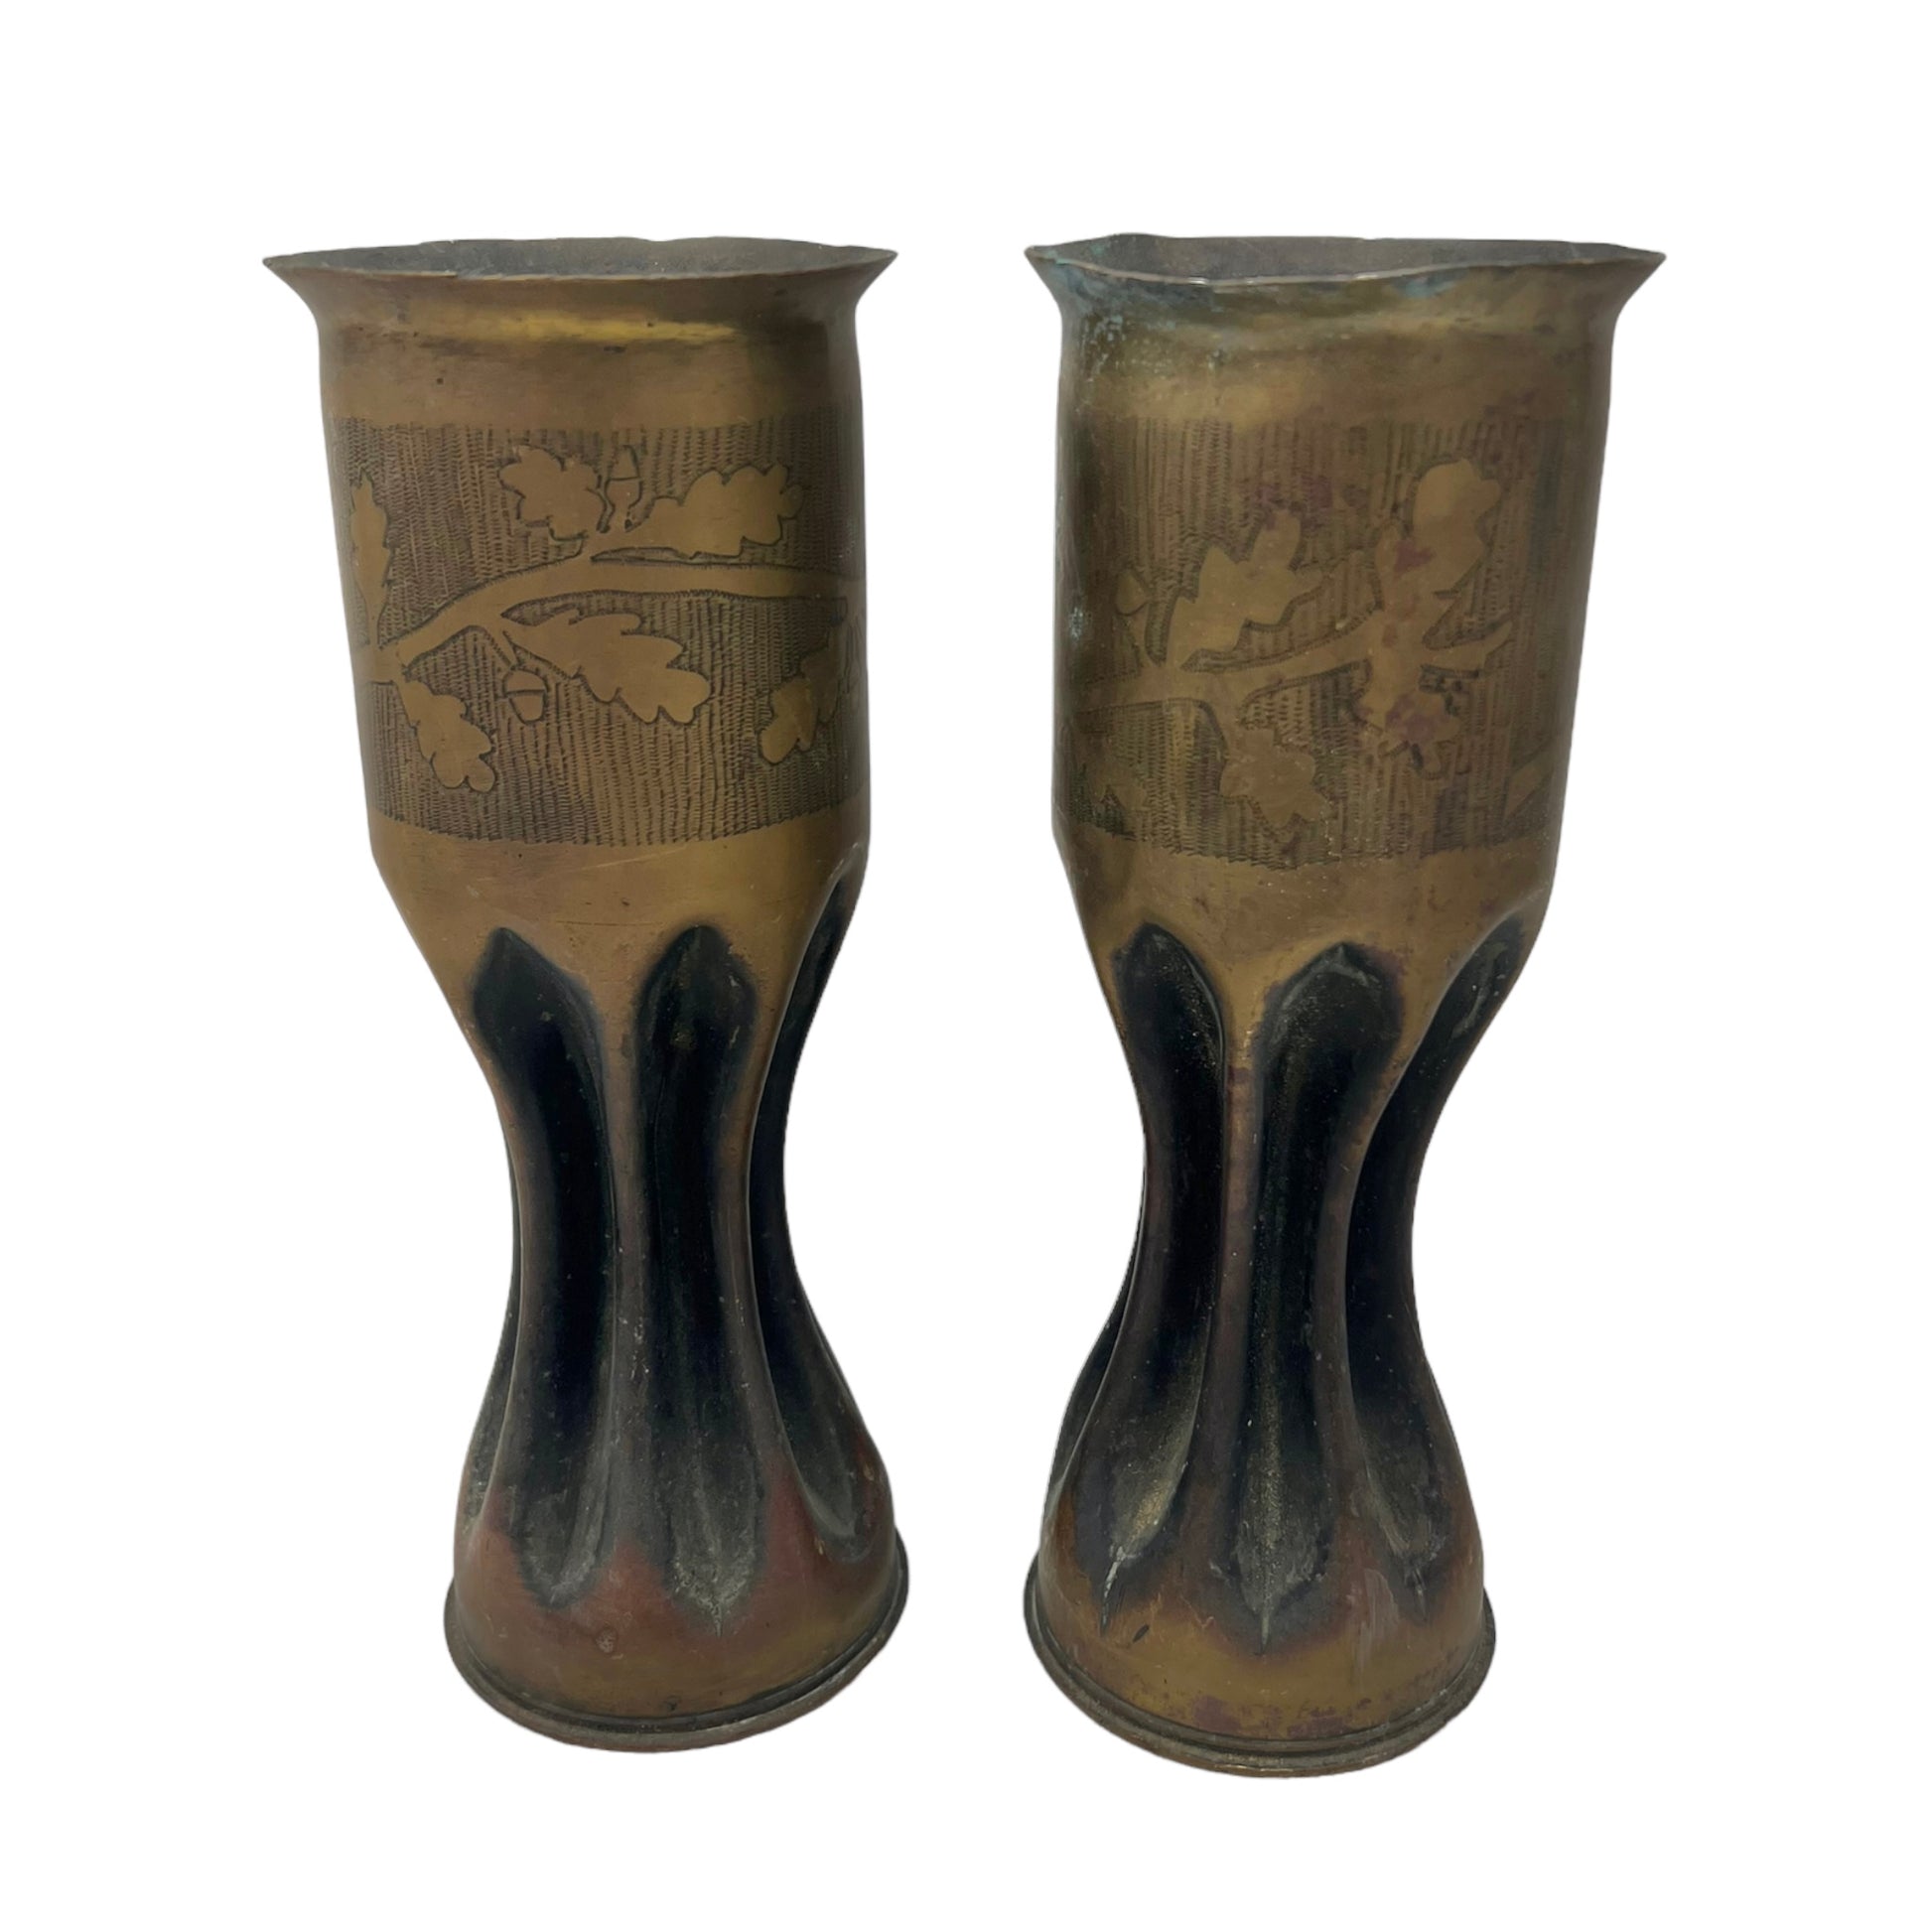 Pair of French brass trench art vases sold by All Things French Store